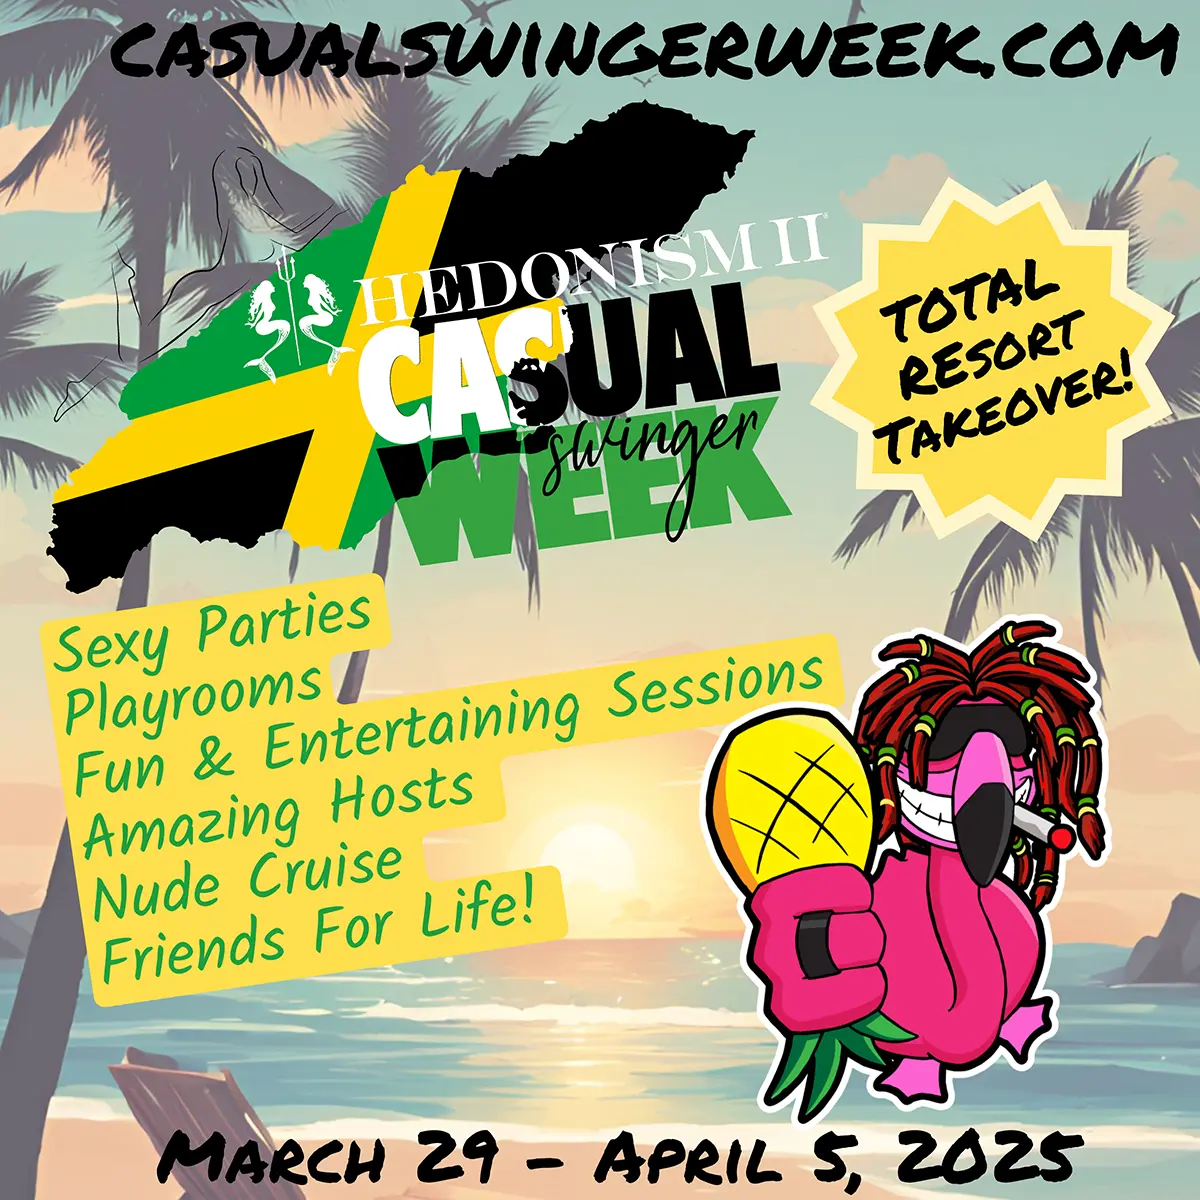 Hedonism II Group Event - Casual Swinger Casual Swinger Week, March 29 - April 5, 2025